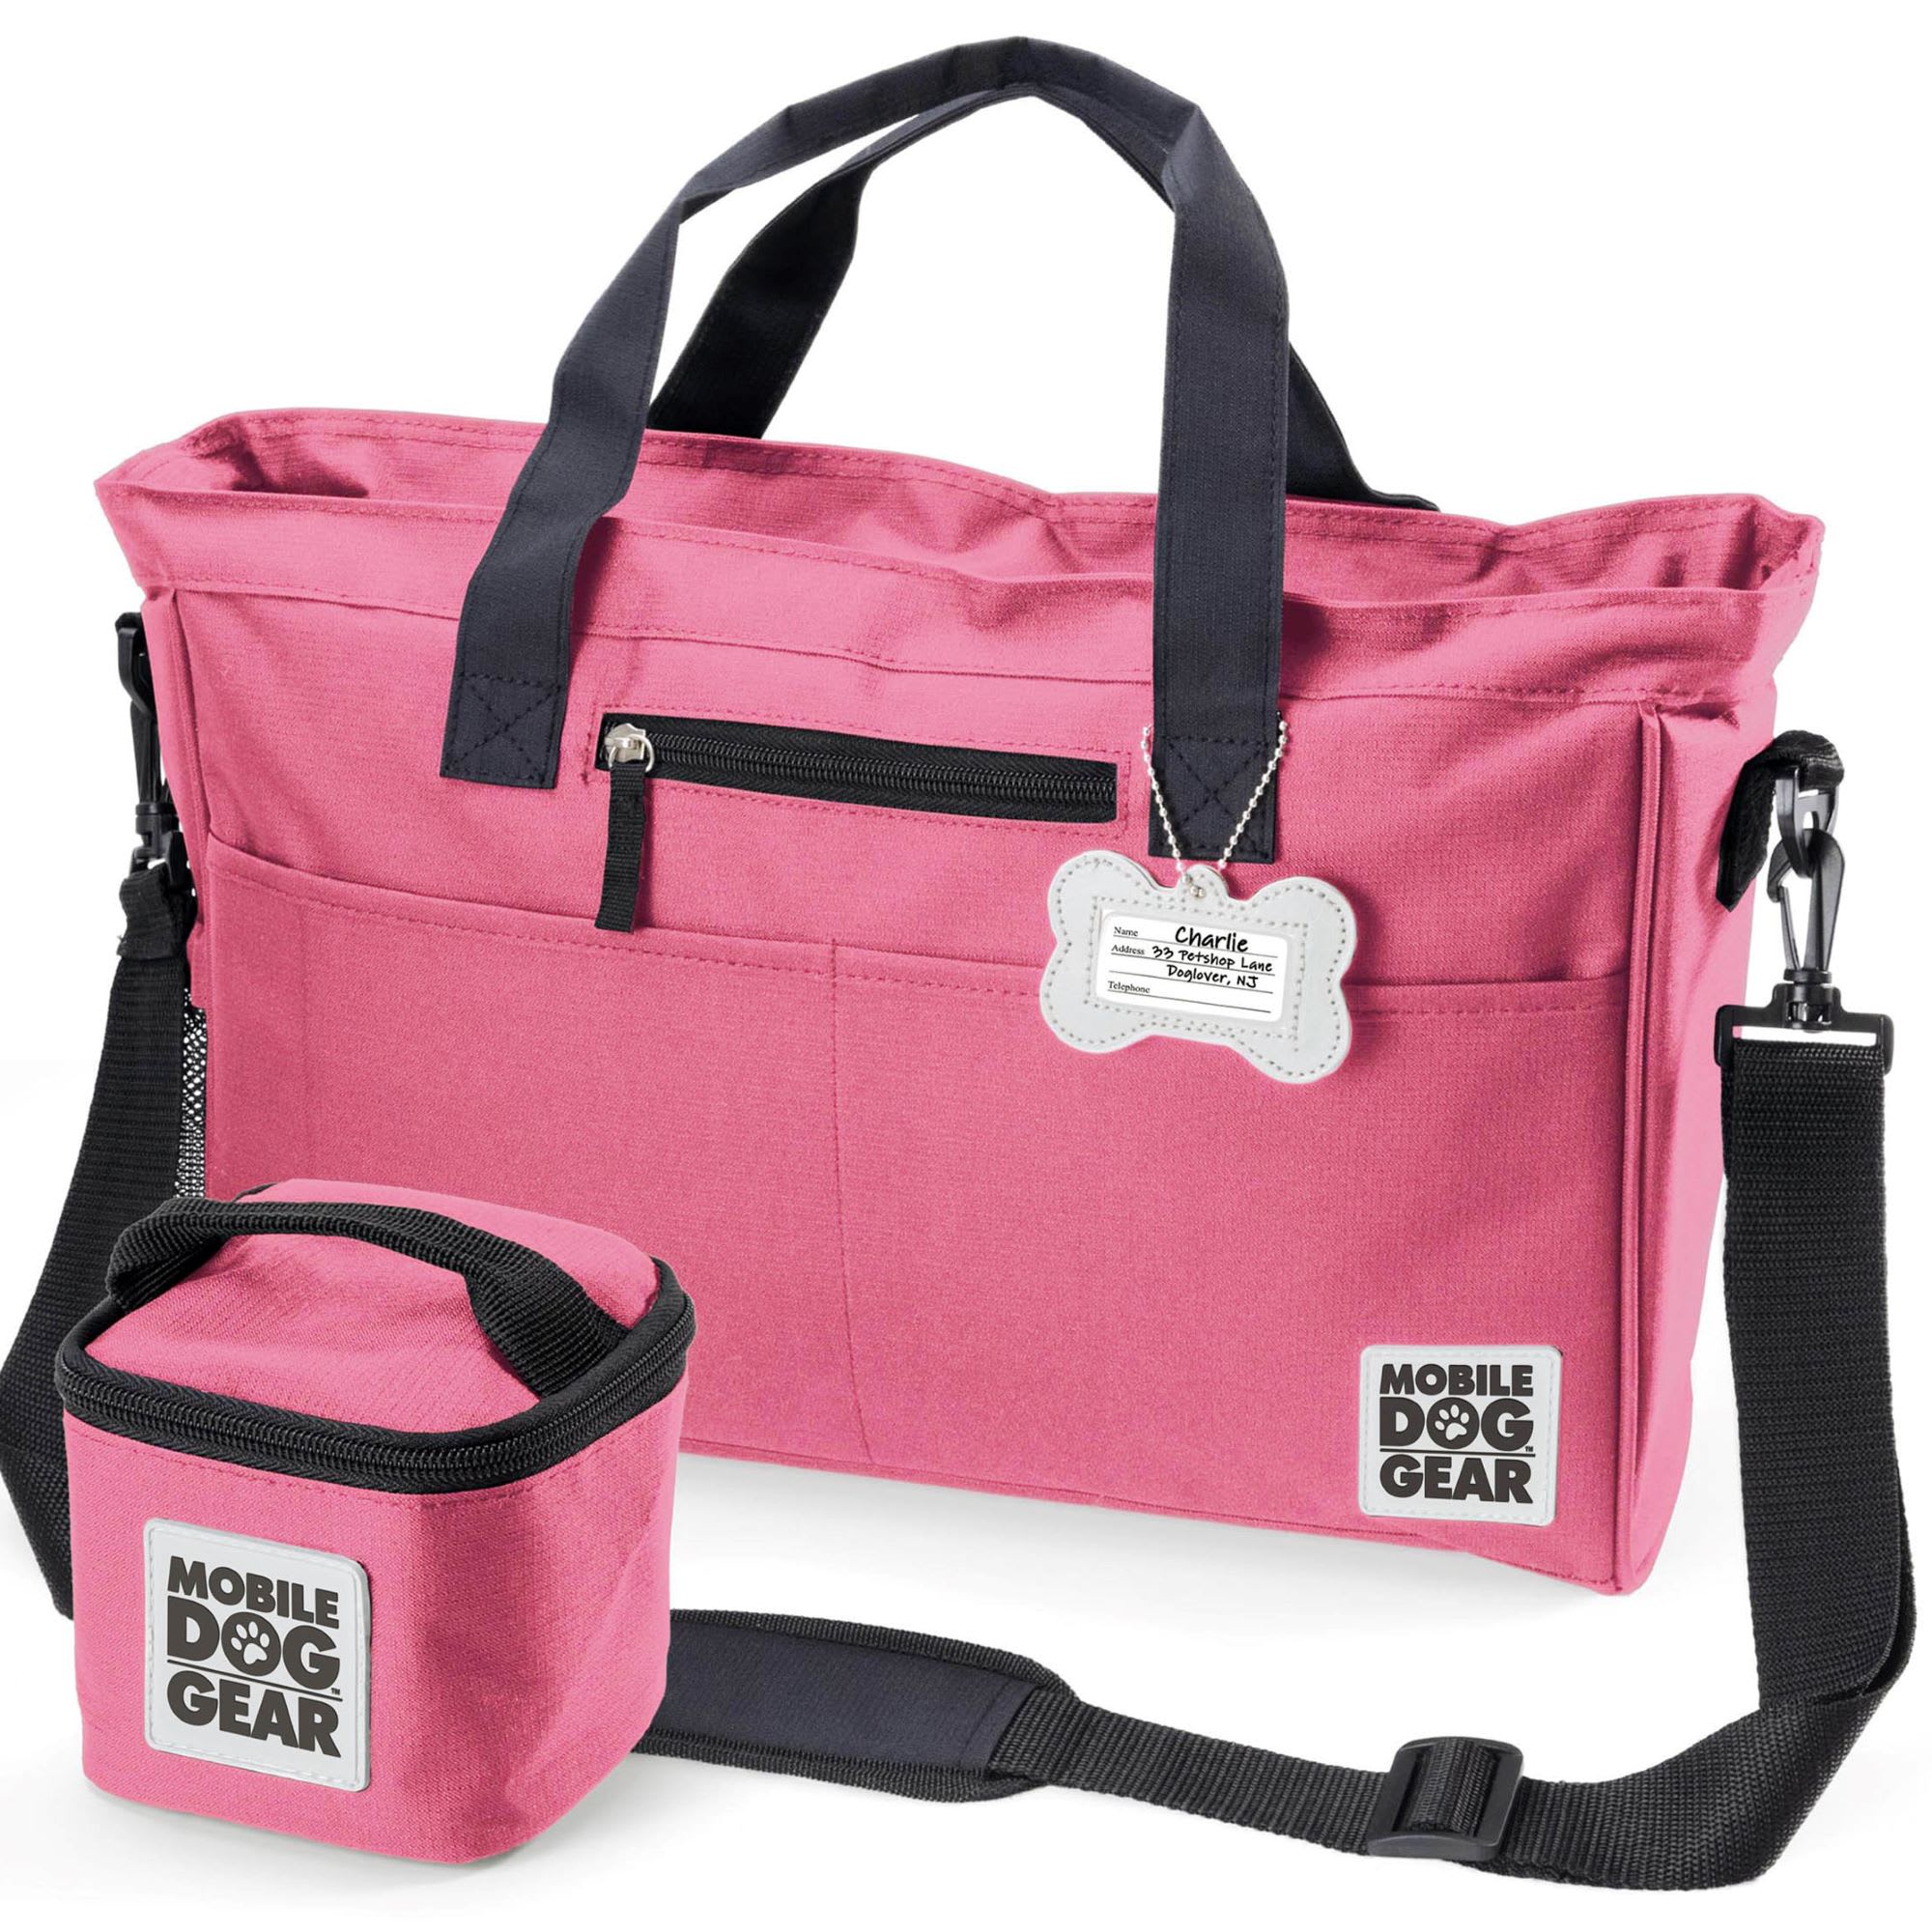 Photos - Backpack Mobile Dog Gear Mobile Dog Gear Pink Day Away Tote Bag, 1.3 LBS, Pink ODG1